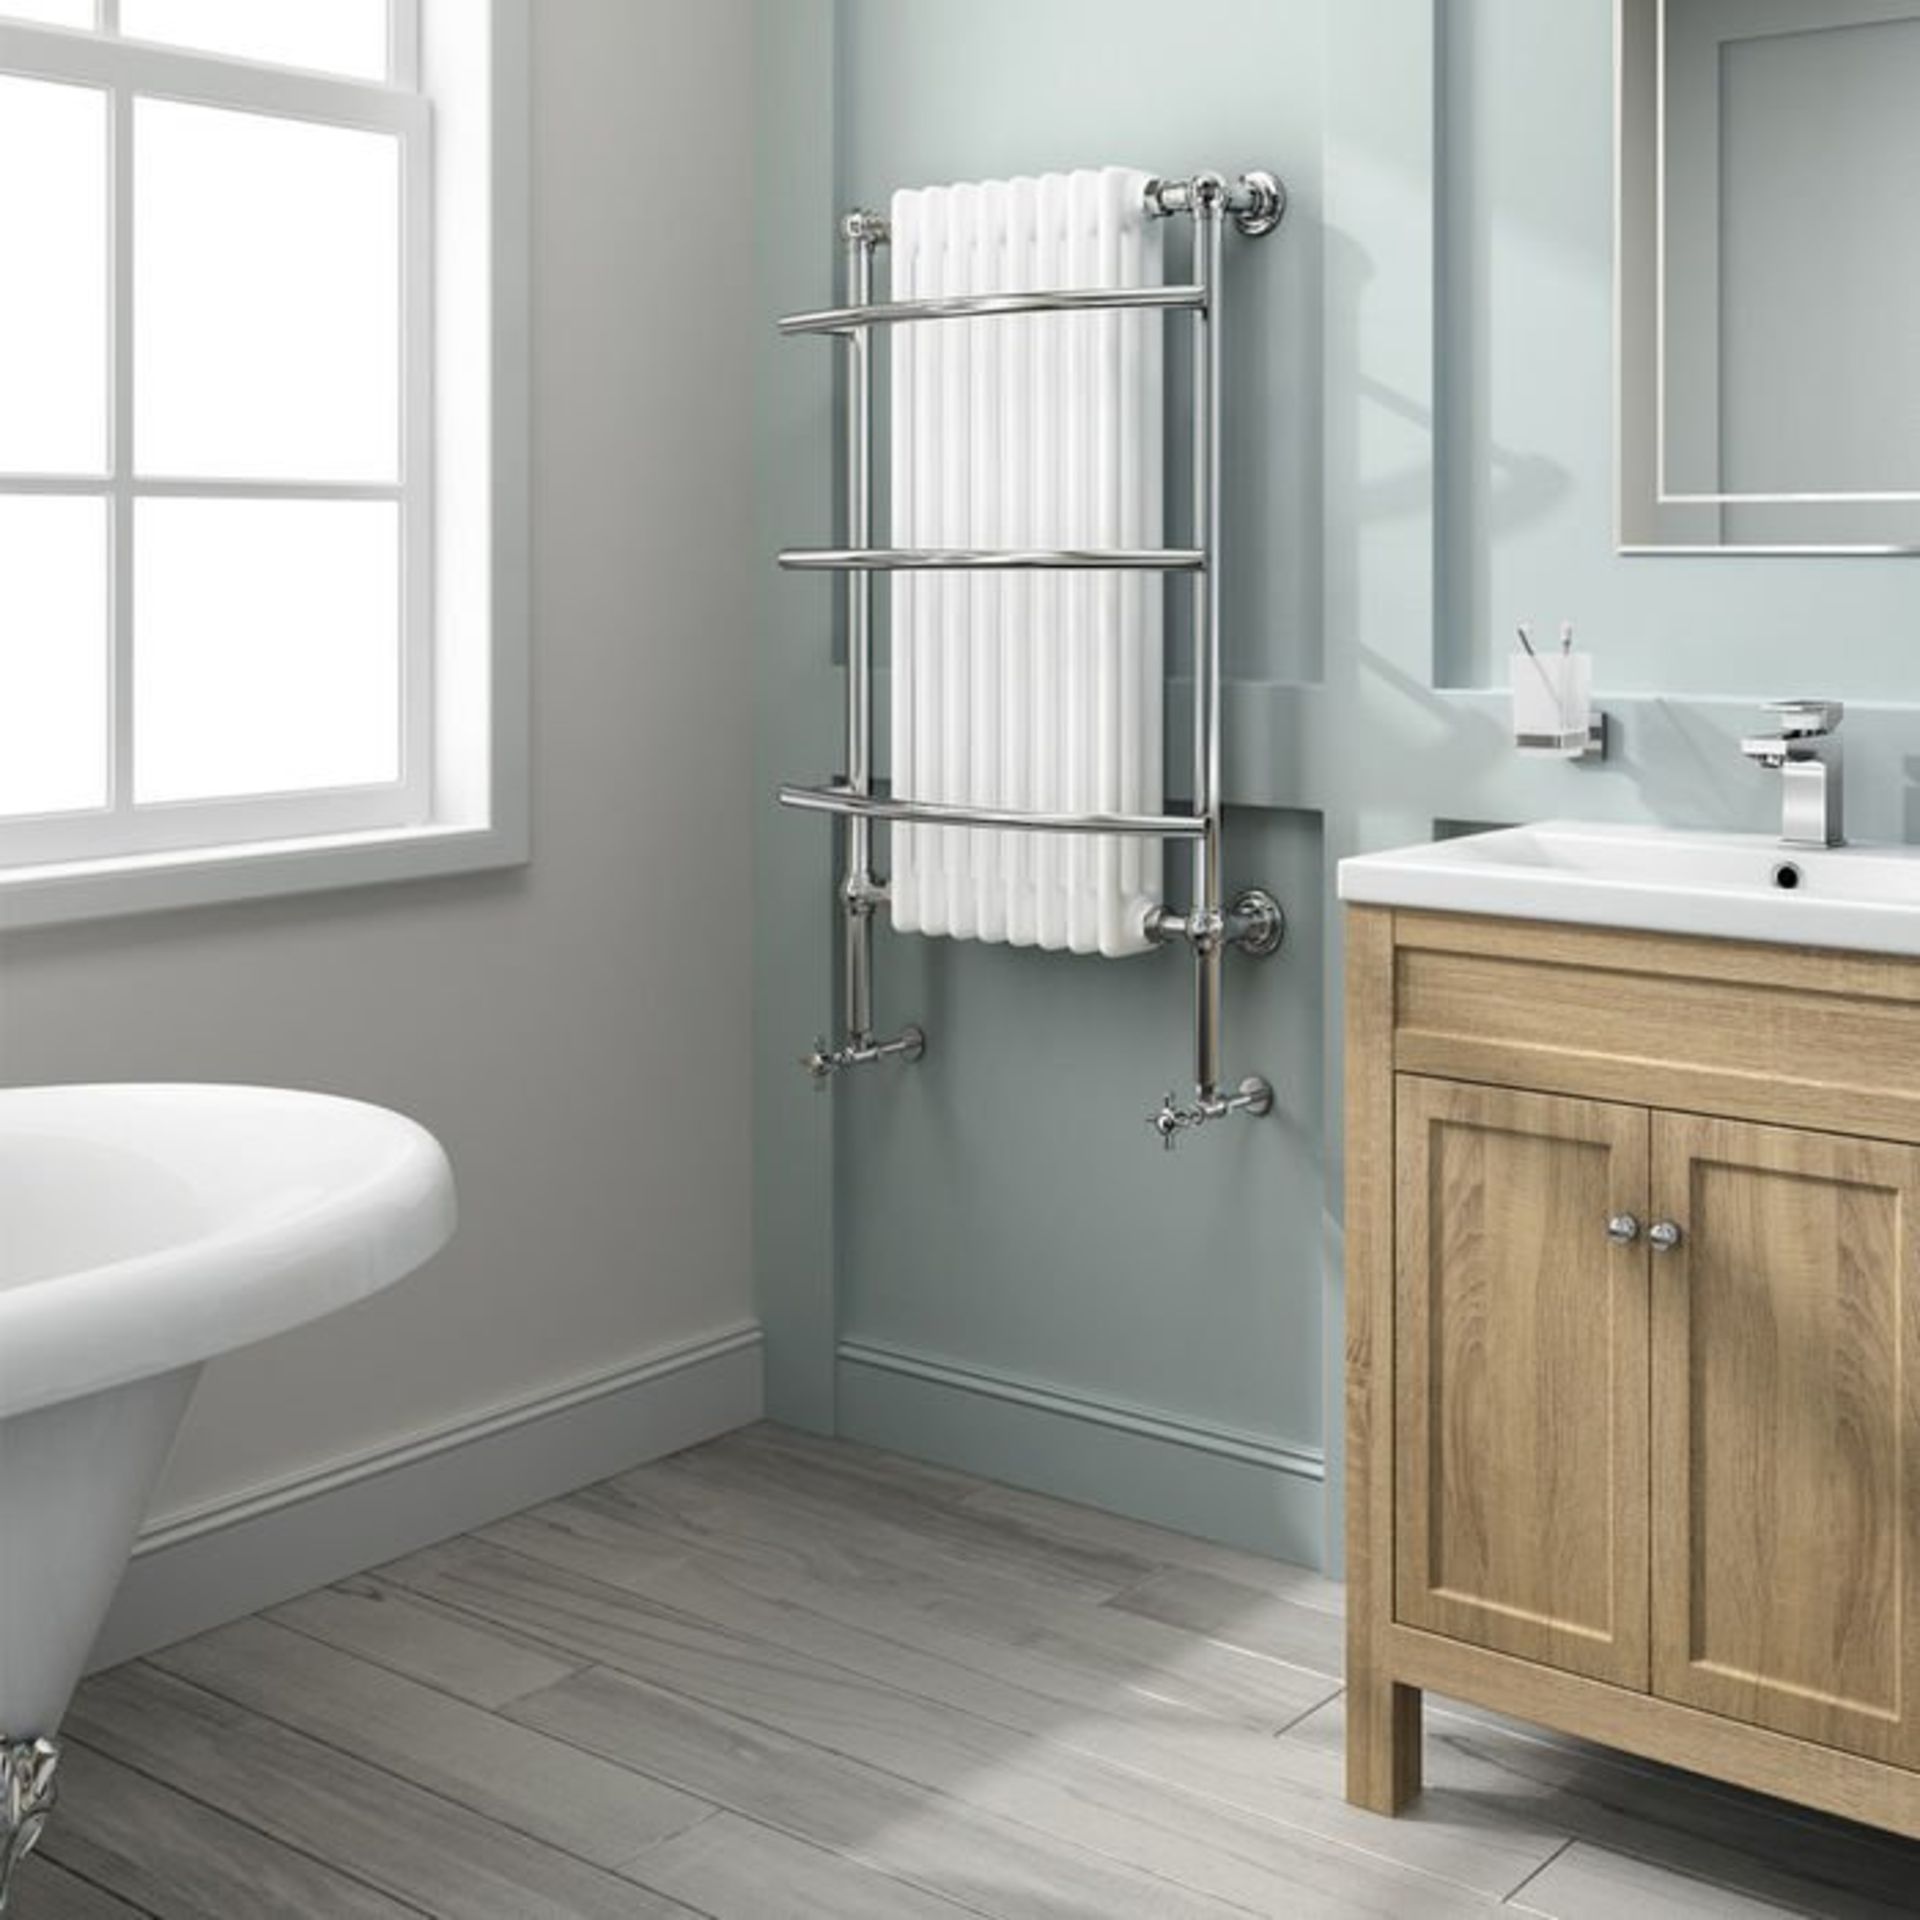 (G51) 1000x635mm Traditional White Wall Mounted Towel Rail Radiator - Victoria Premium RRP £341.99 - Image 2 of 6